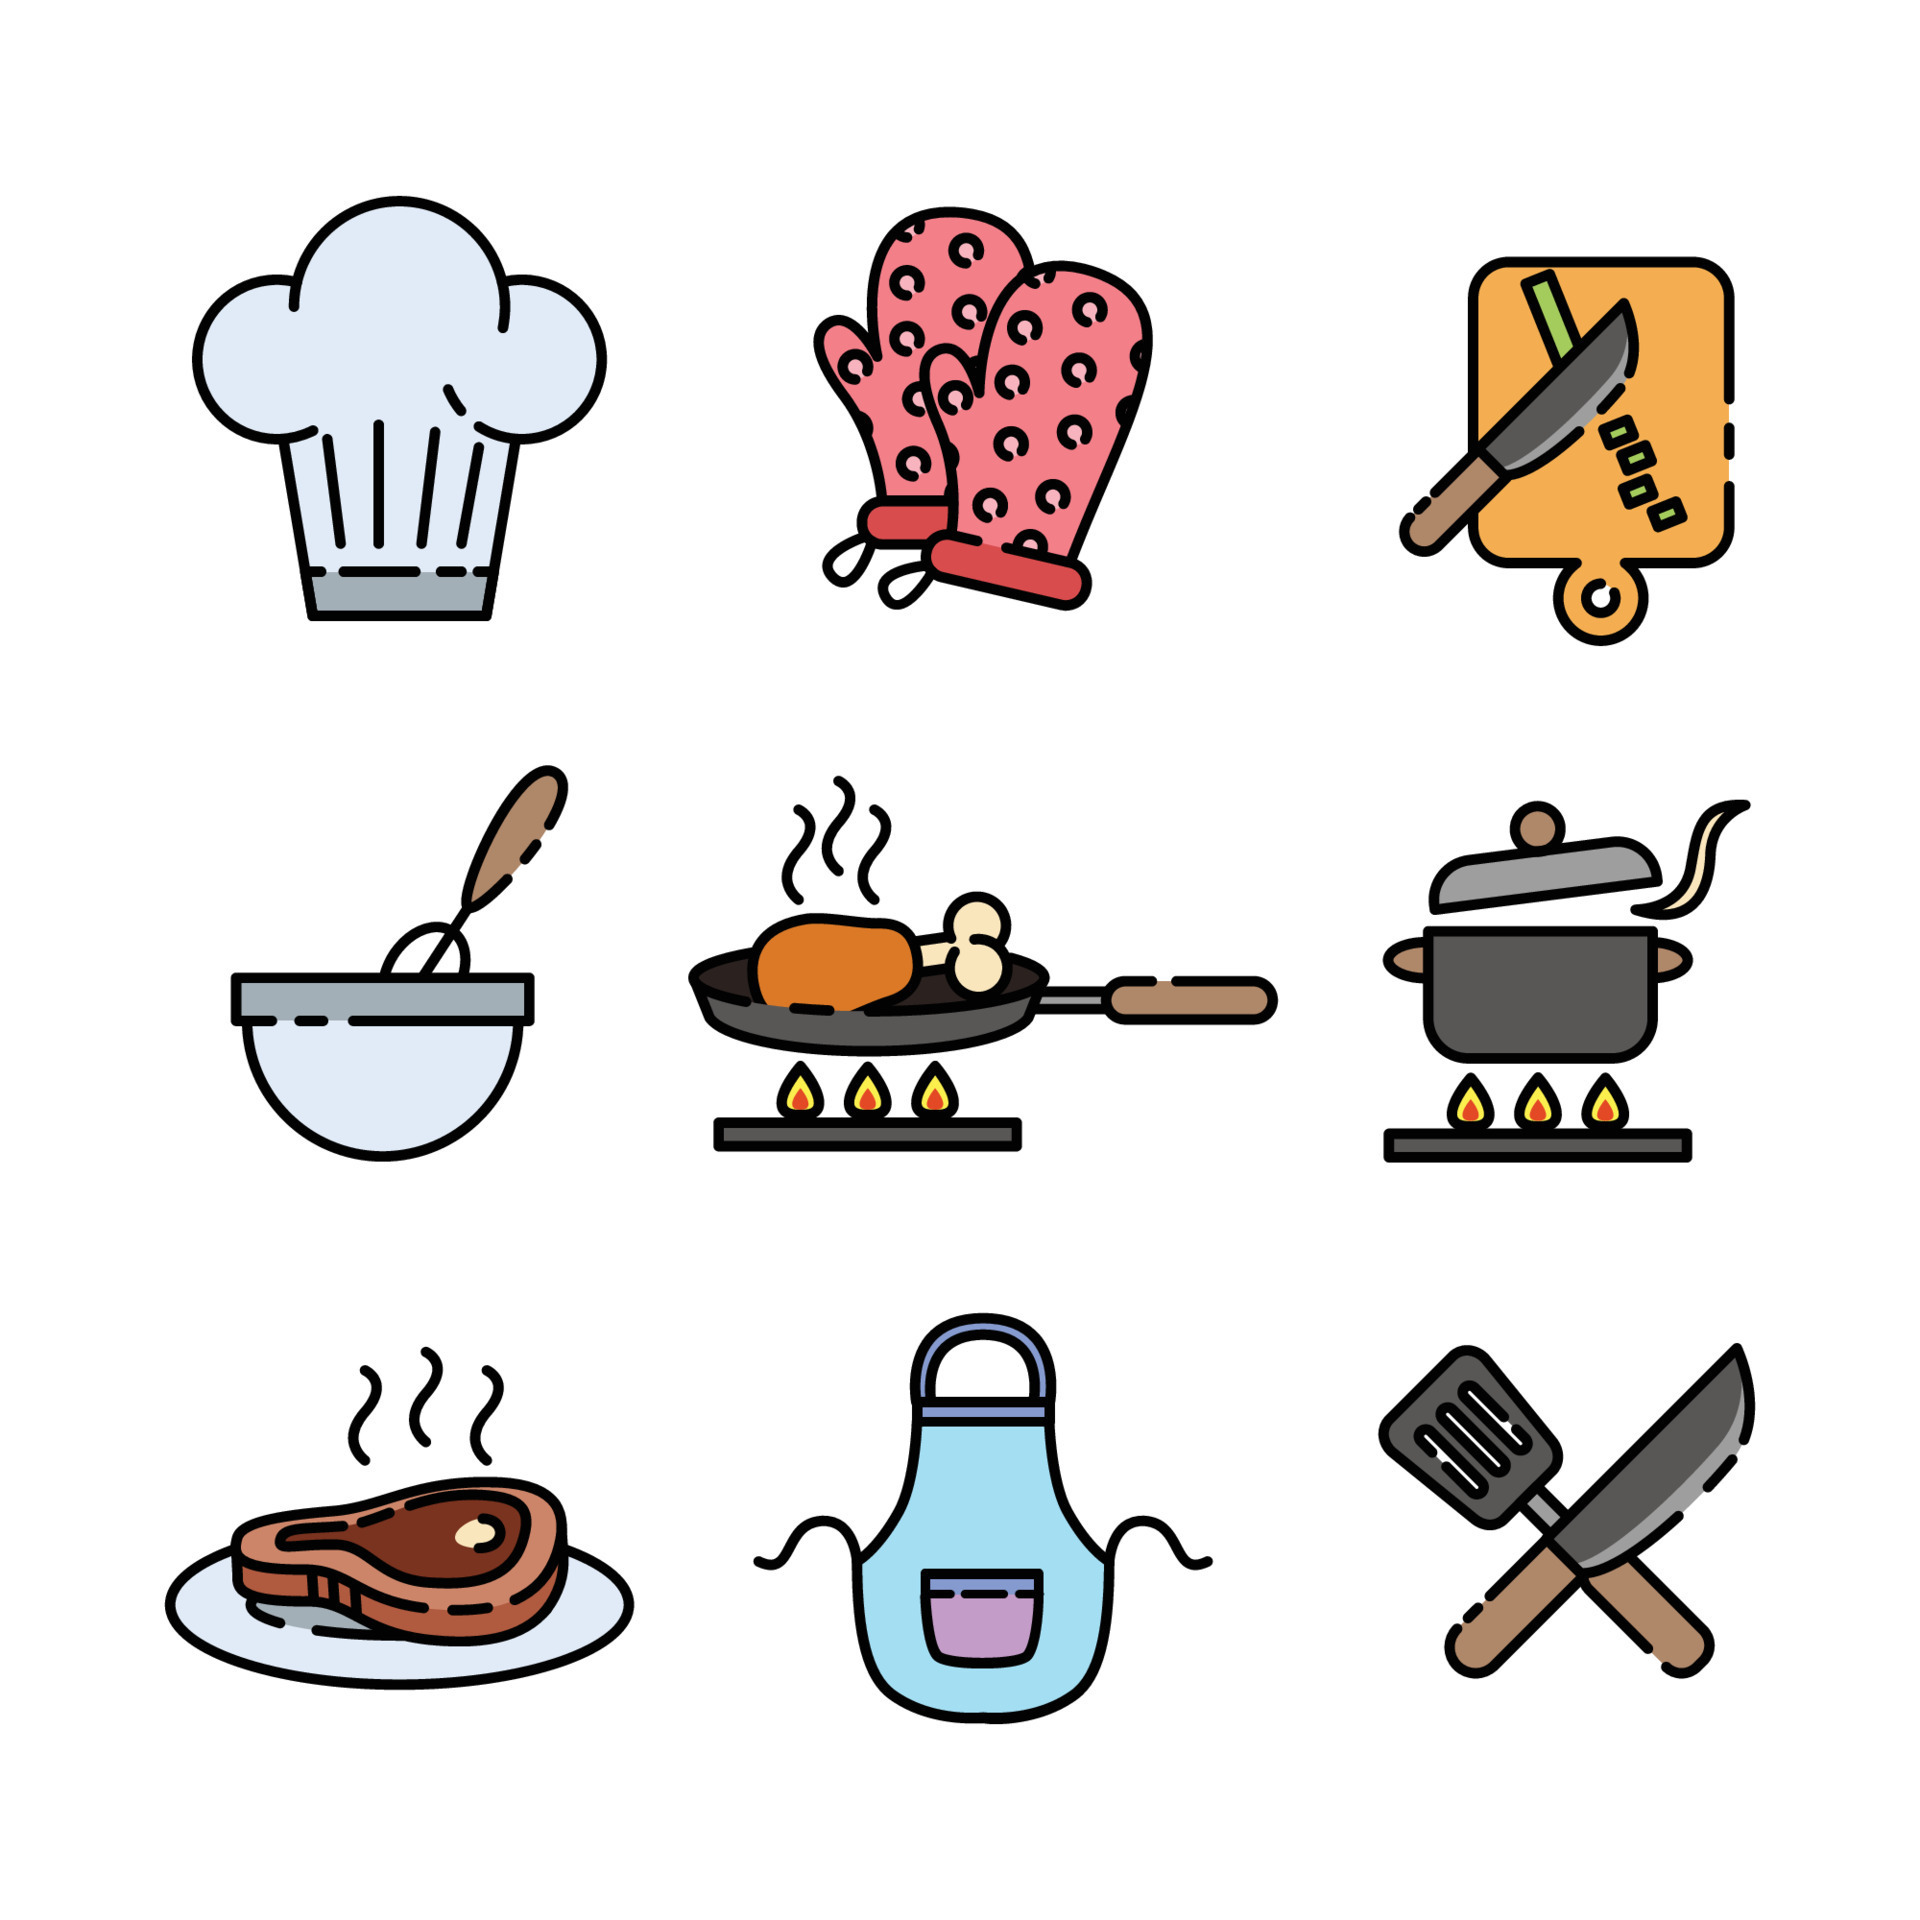 https://static.vecteezy.com/system/resources/previews/008/248/862/original/chef-and-cooking-set-free-vector.jpg